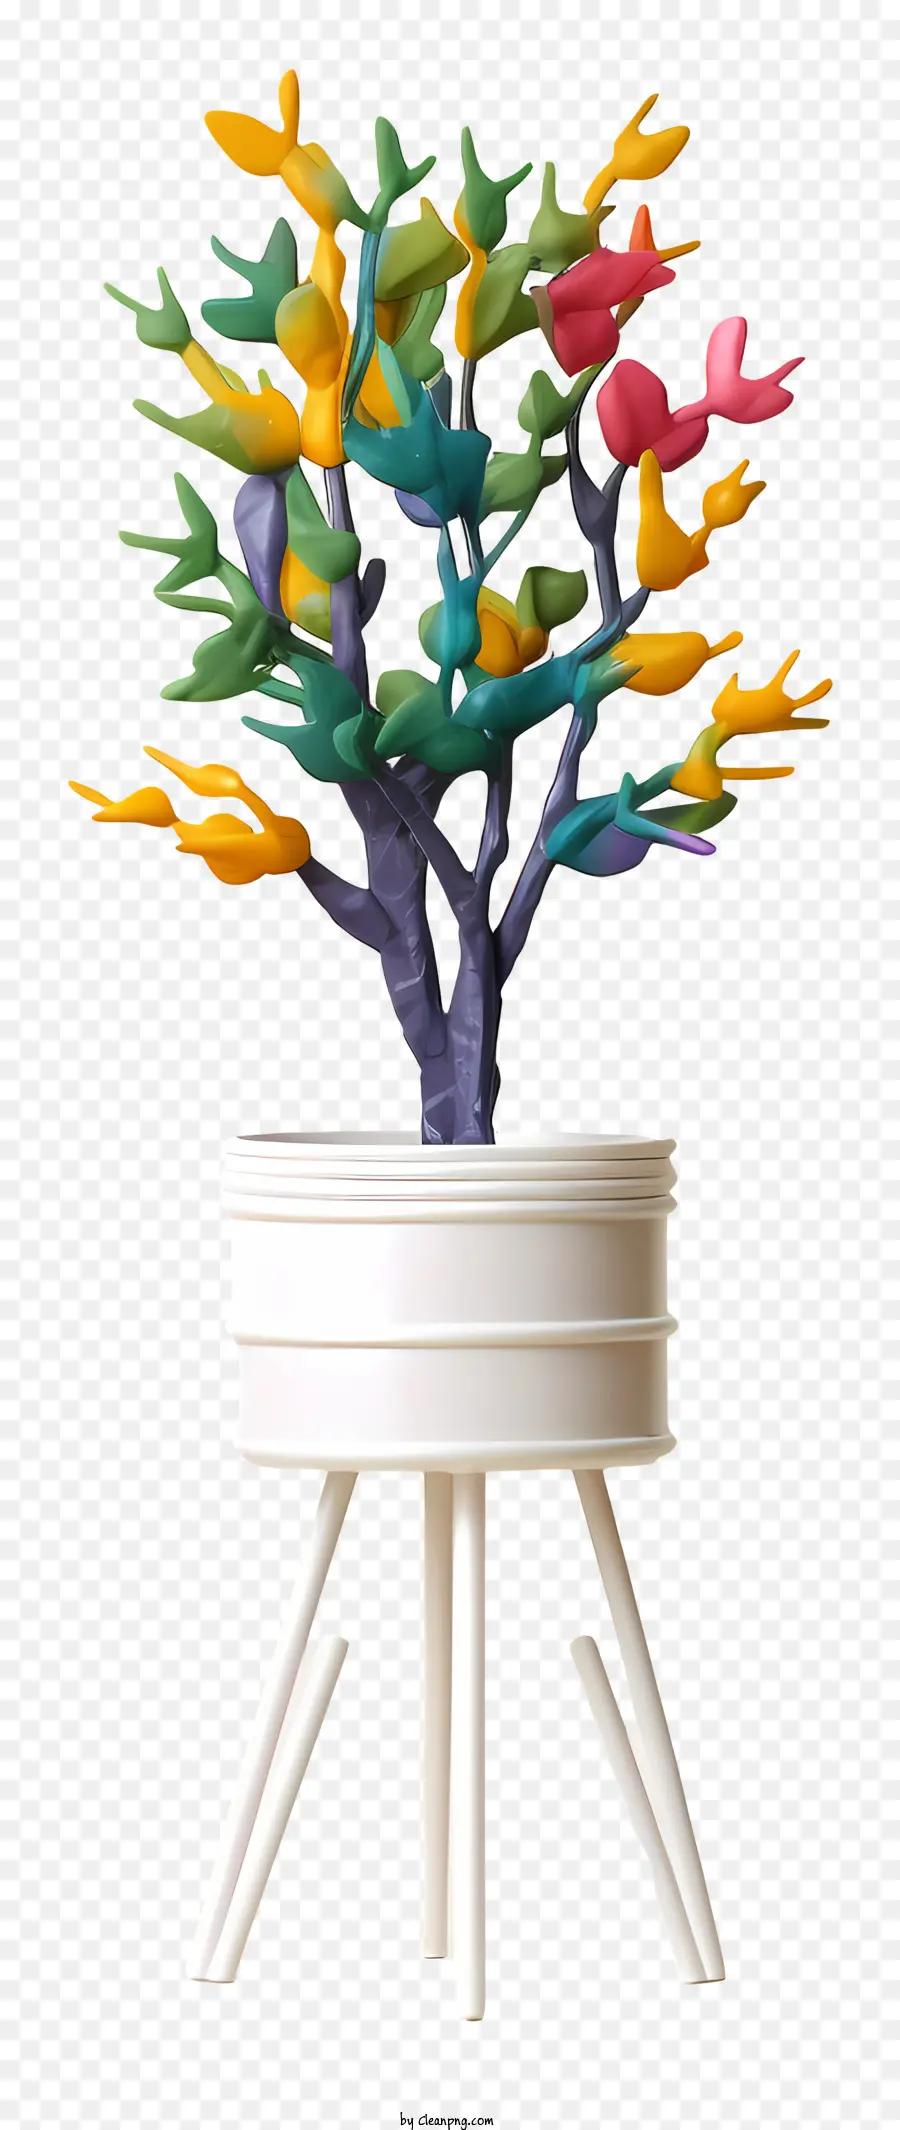 tree colored leaves floating leaves white pedestal image without color